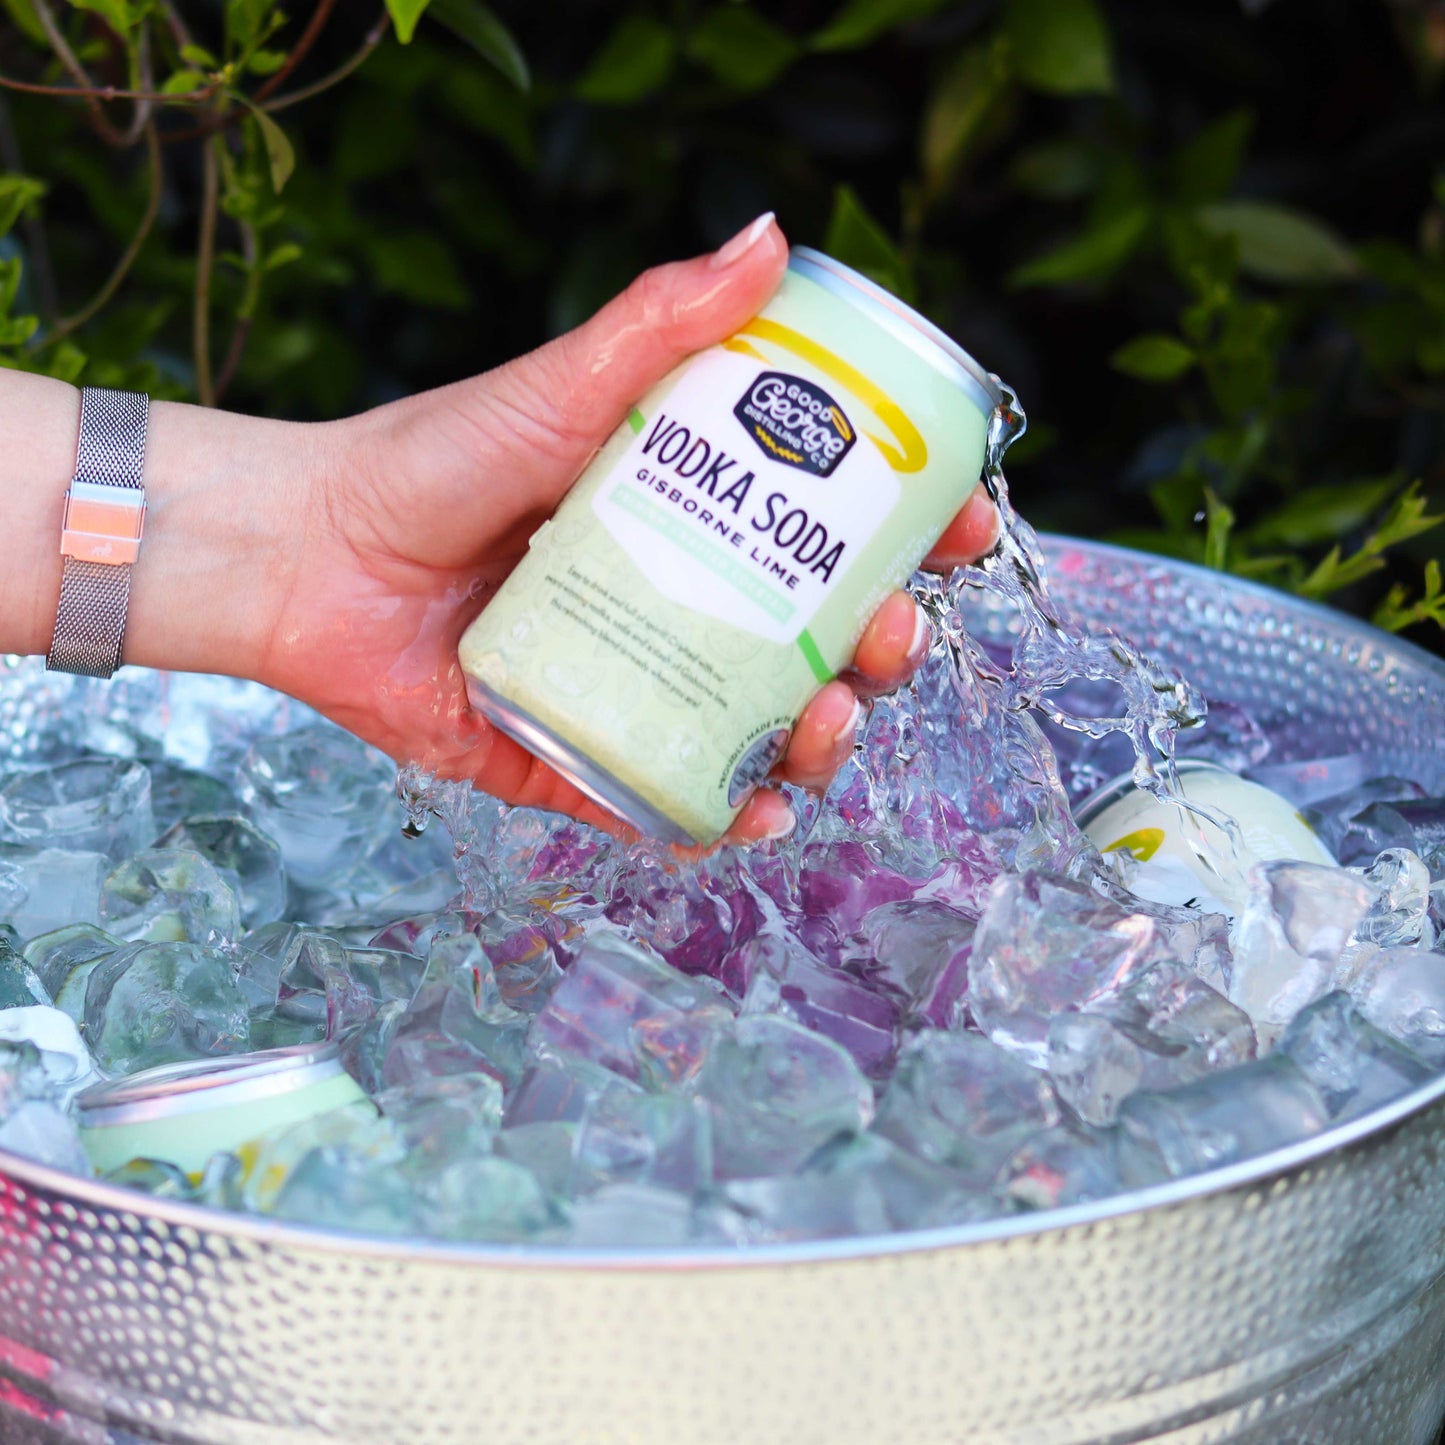 Good George Vodka Soda Lime  330ml Can getting taken out of the ice bucket